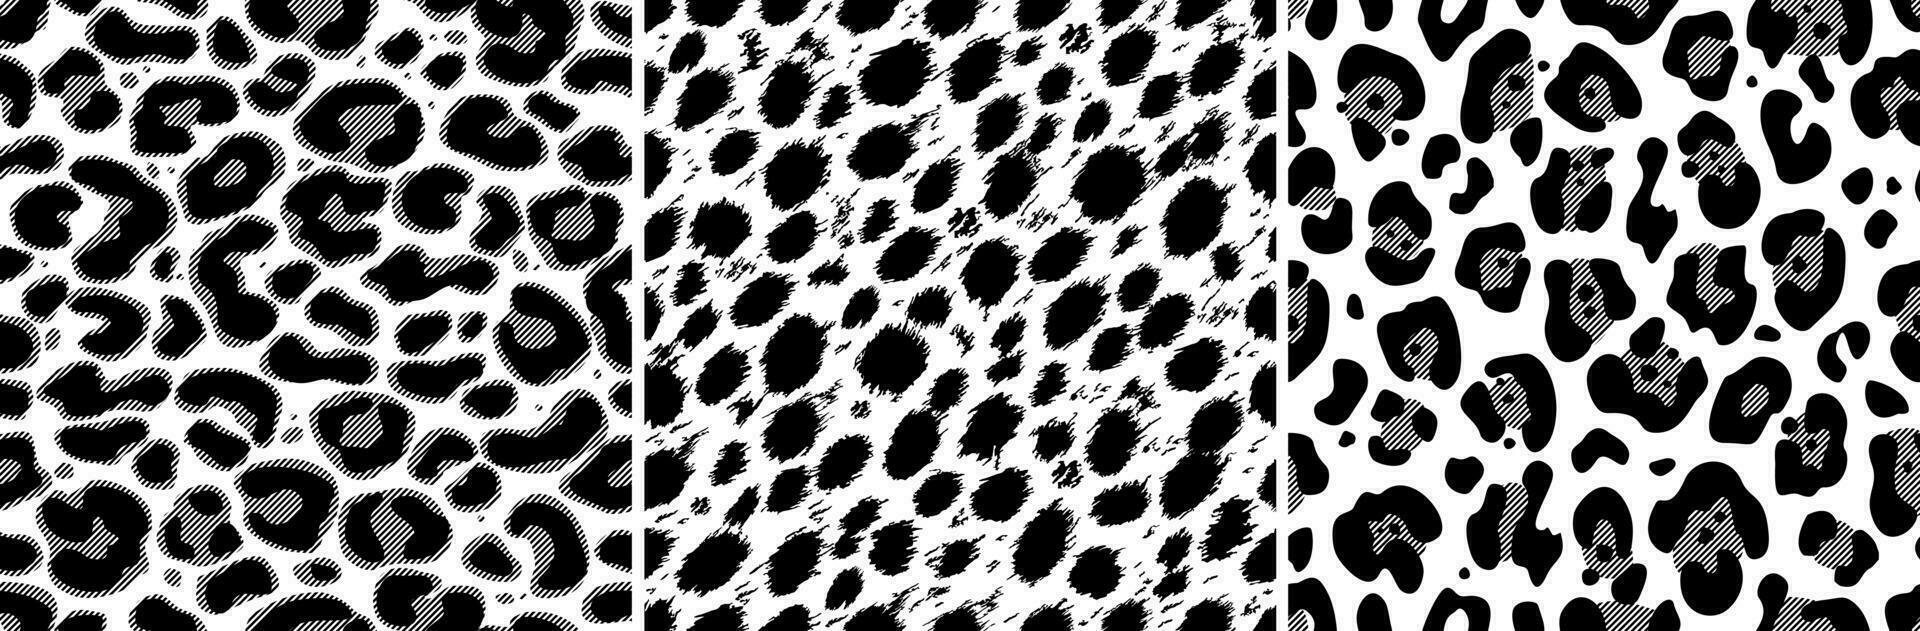 Animal seamless patterns set. Jaguar, leopard, cheetah skin texture in black and white colors. Stylized design for the Internet and print. For textiles, paper, wallpaper. Illustrated vector clipart.